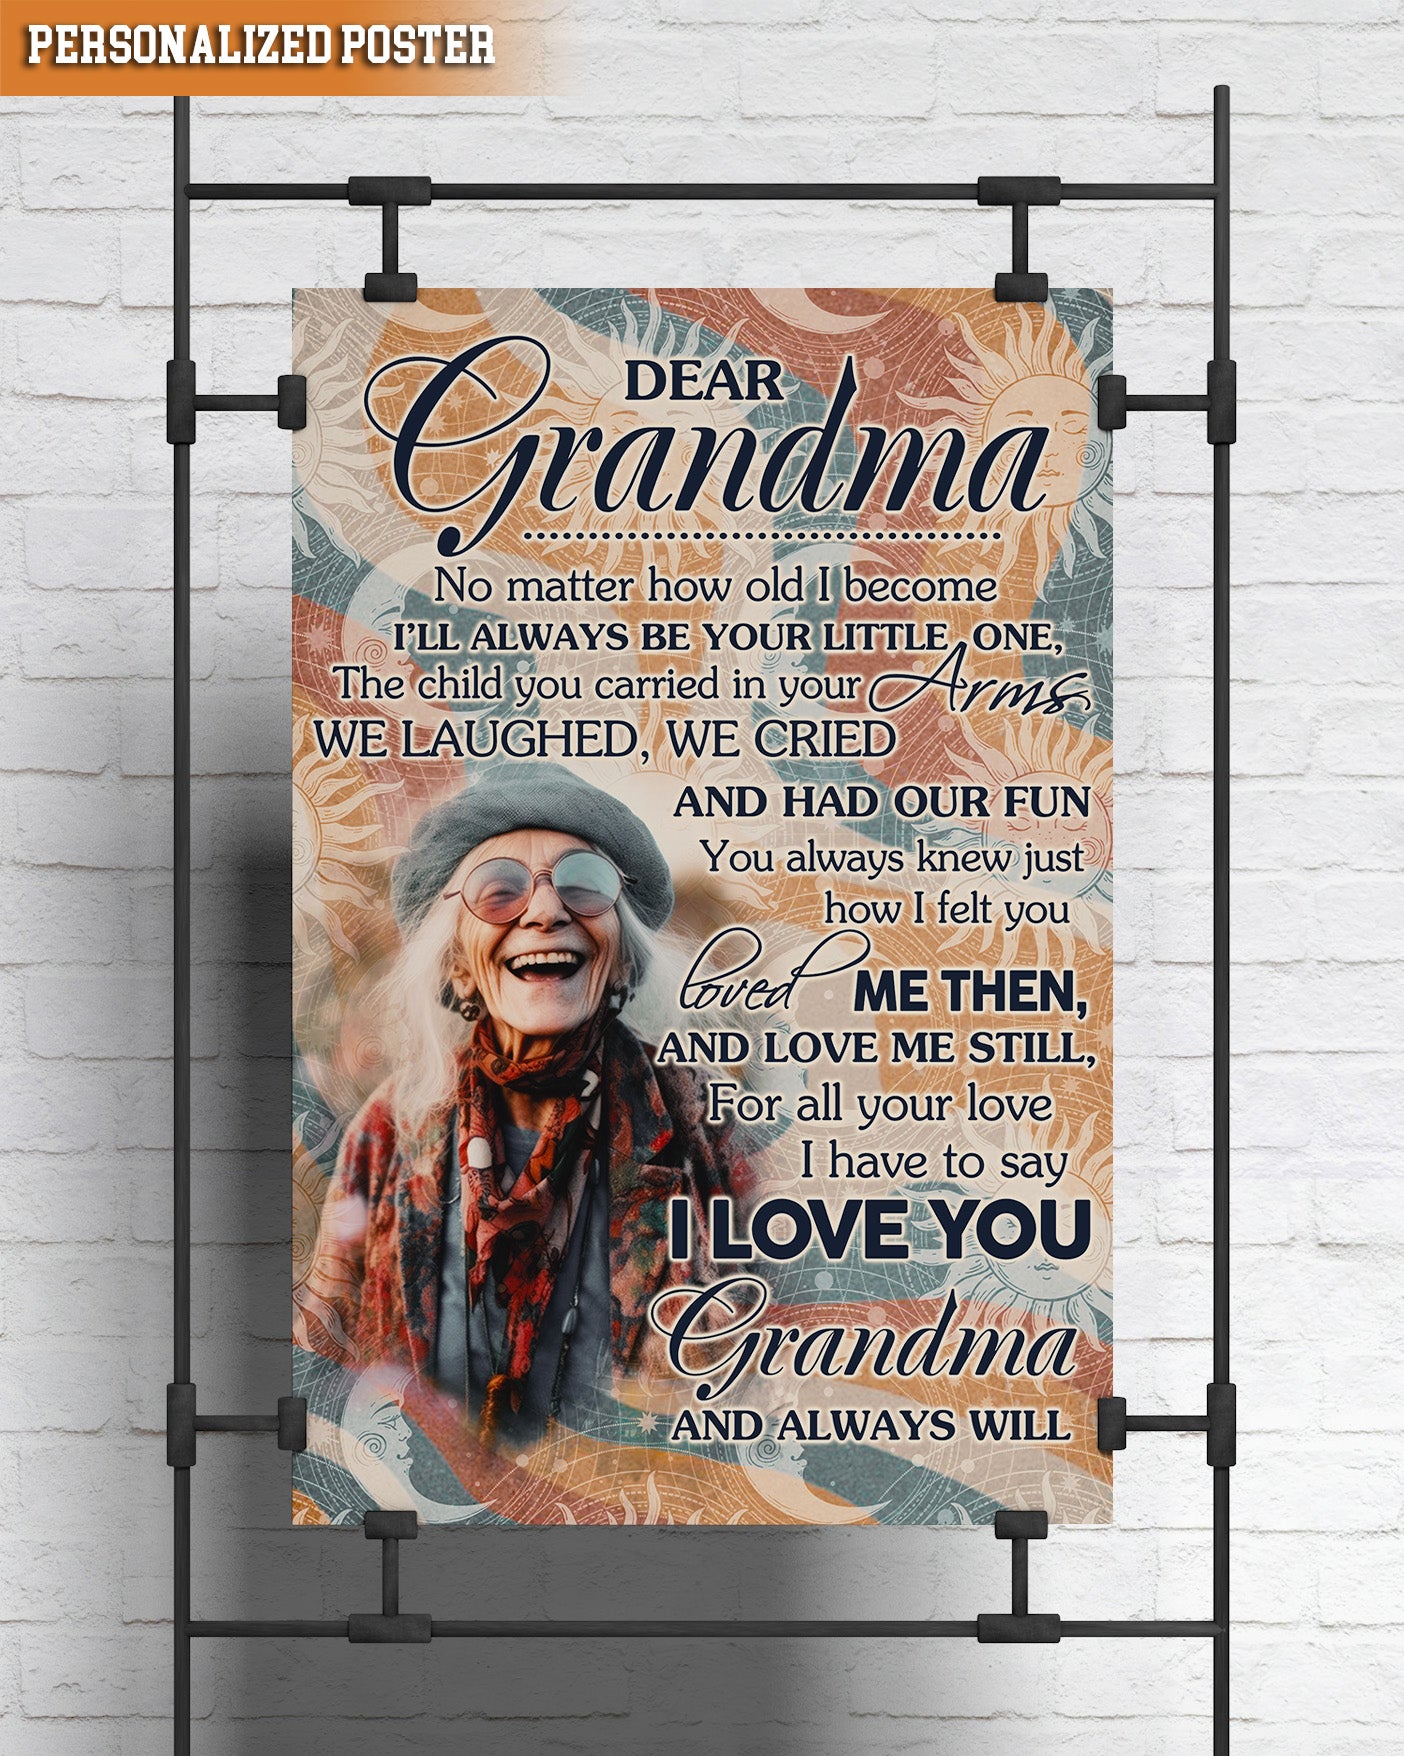 PERSONALIZED I LOVE YOU AND ALWAYS WILL POSTER - NO2804232